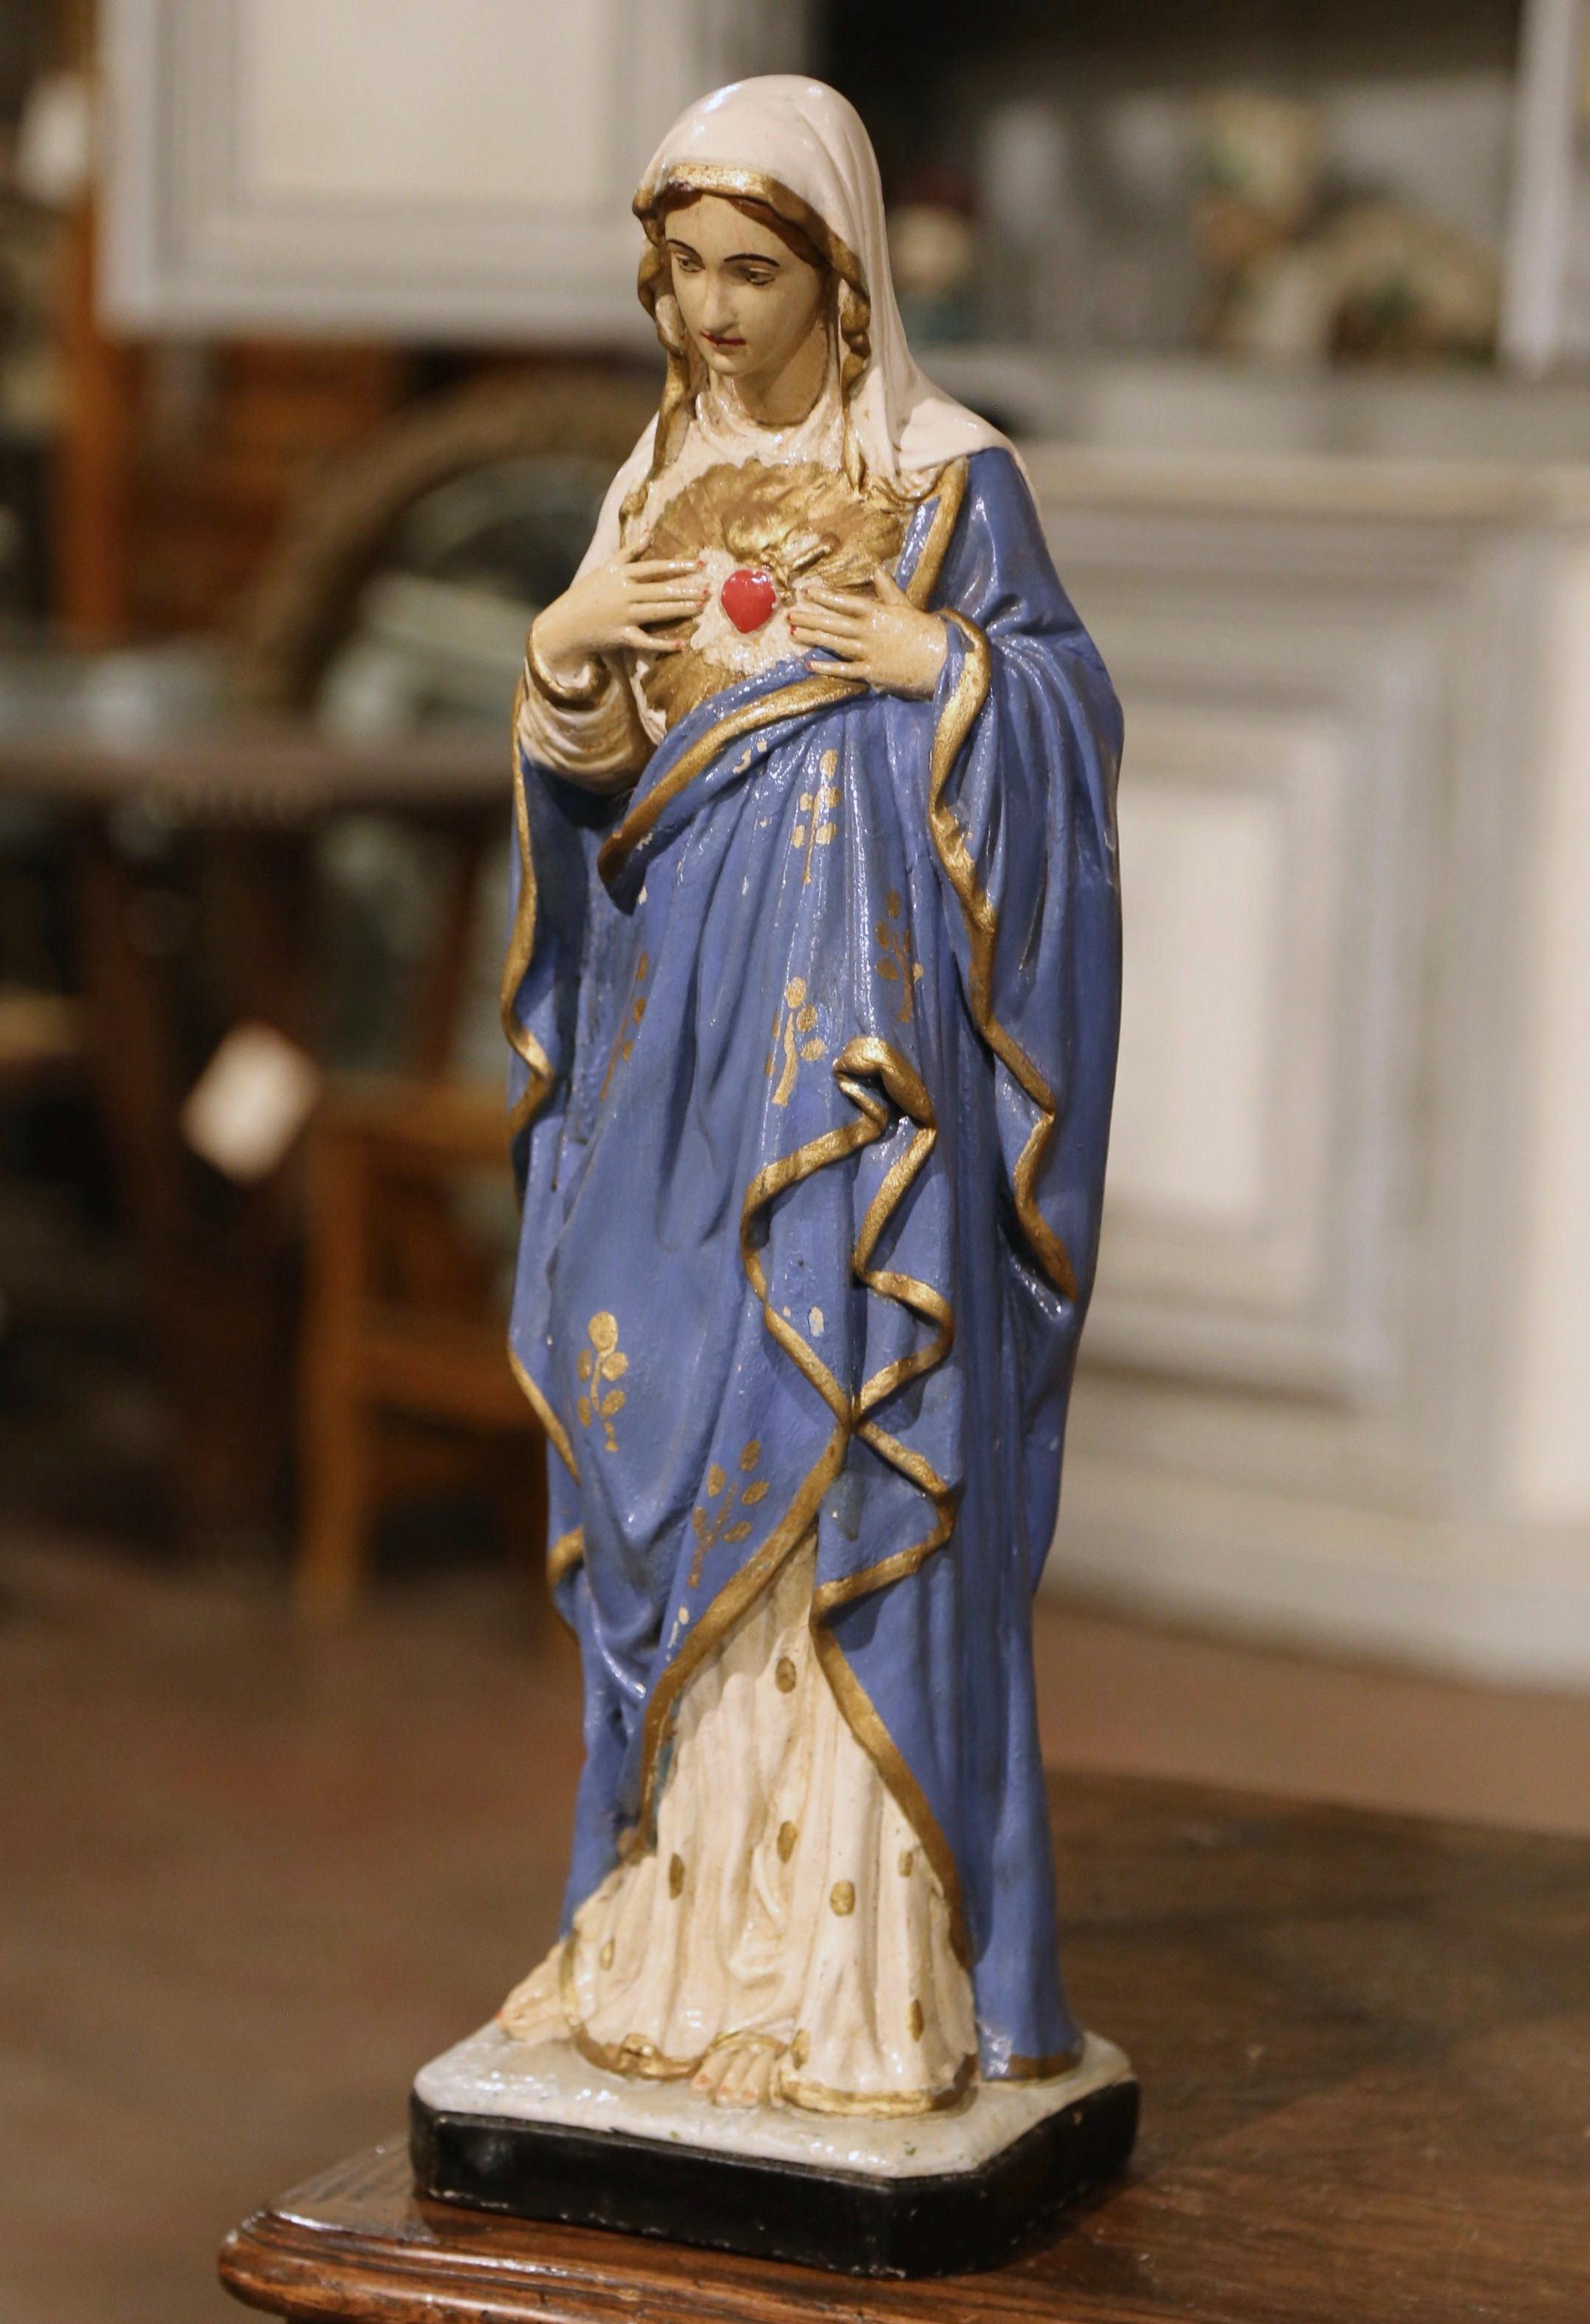 This beautiful and colorful antique Virgin Mary statue was hand carved in France, circa 1890. Built of terracotta, the sculpture depicts our Mother standing and showing her Immaculate Sacred Heart. The religious statue is in excellent condition with